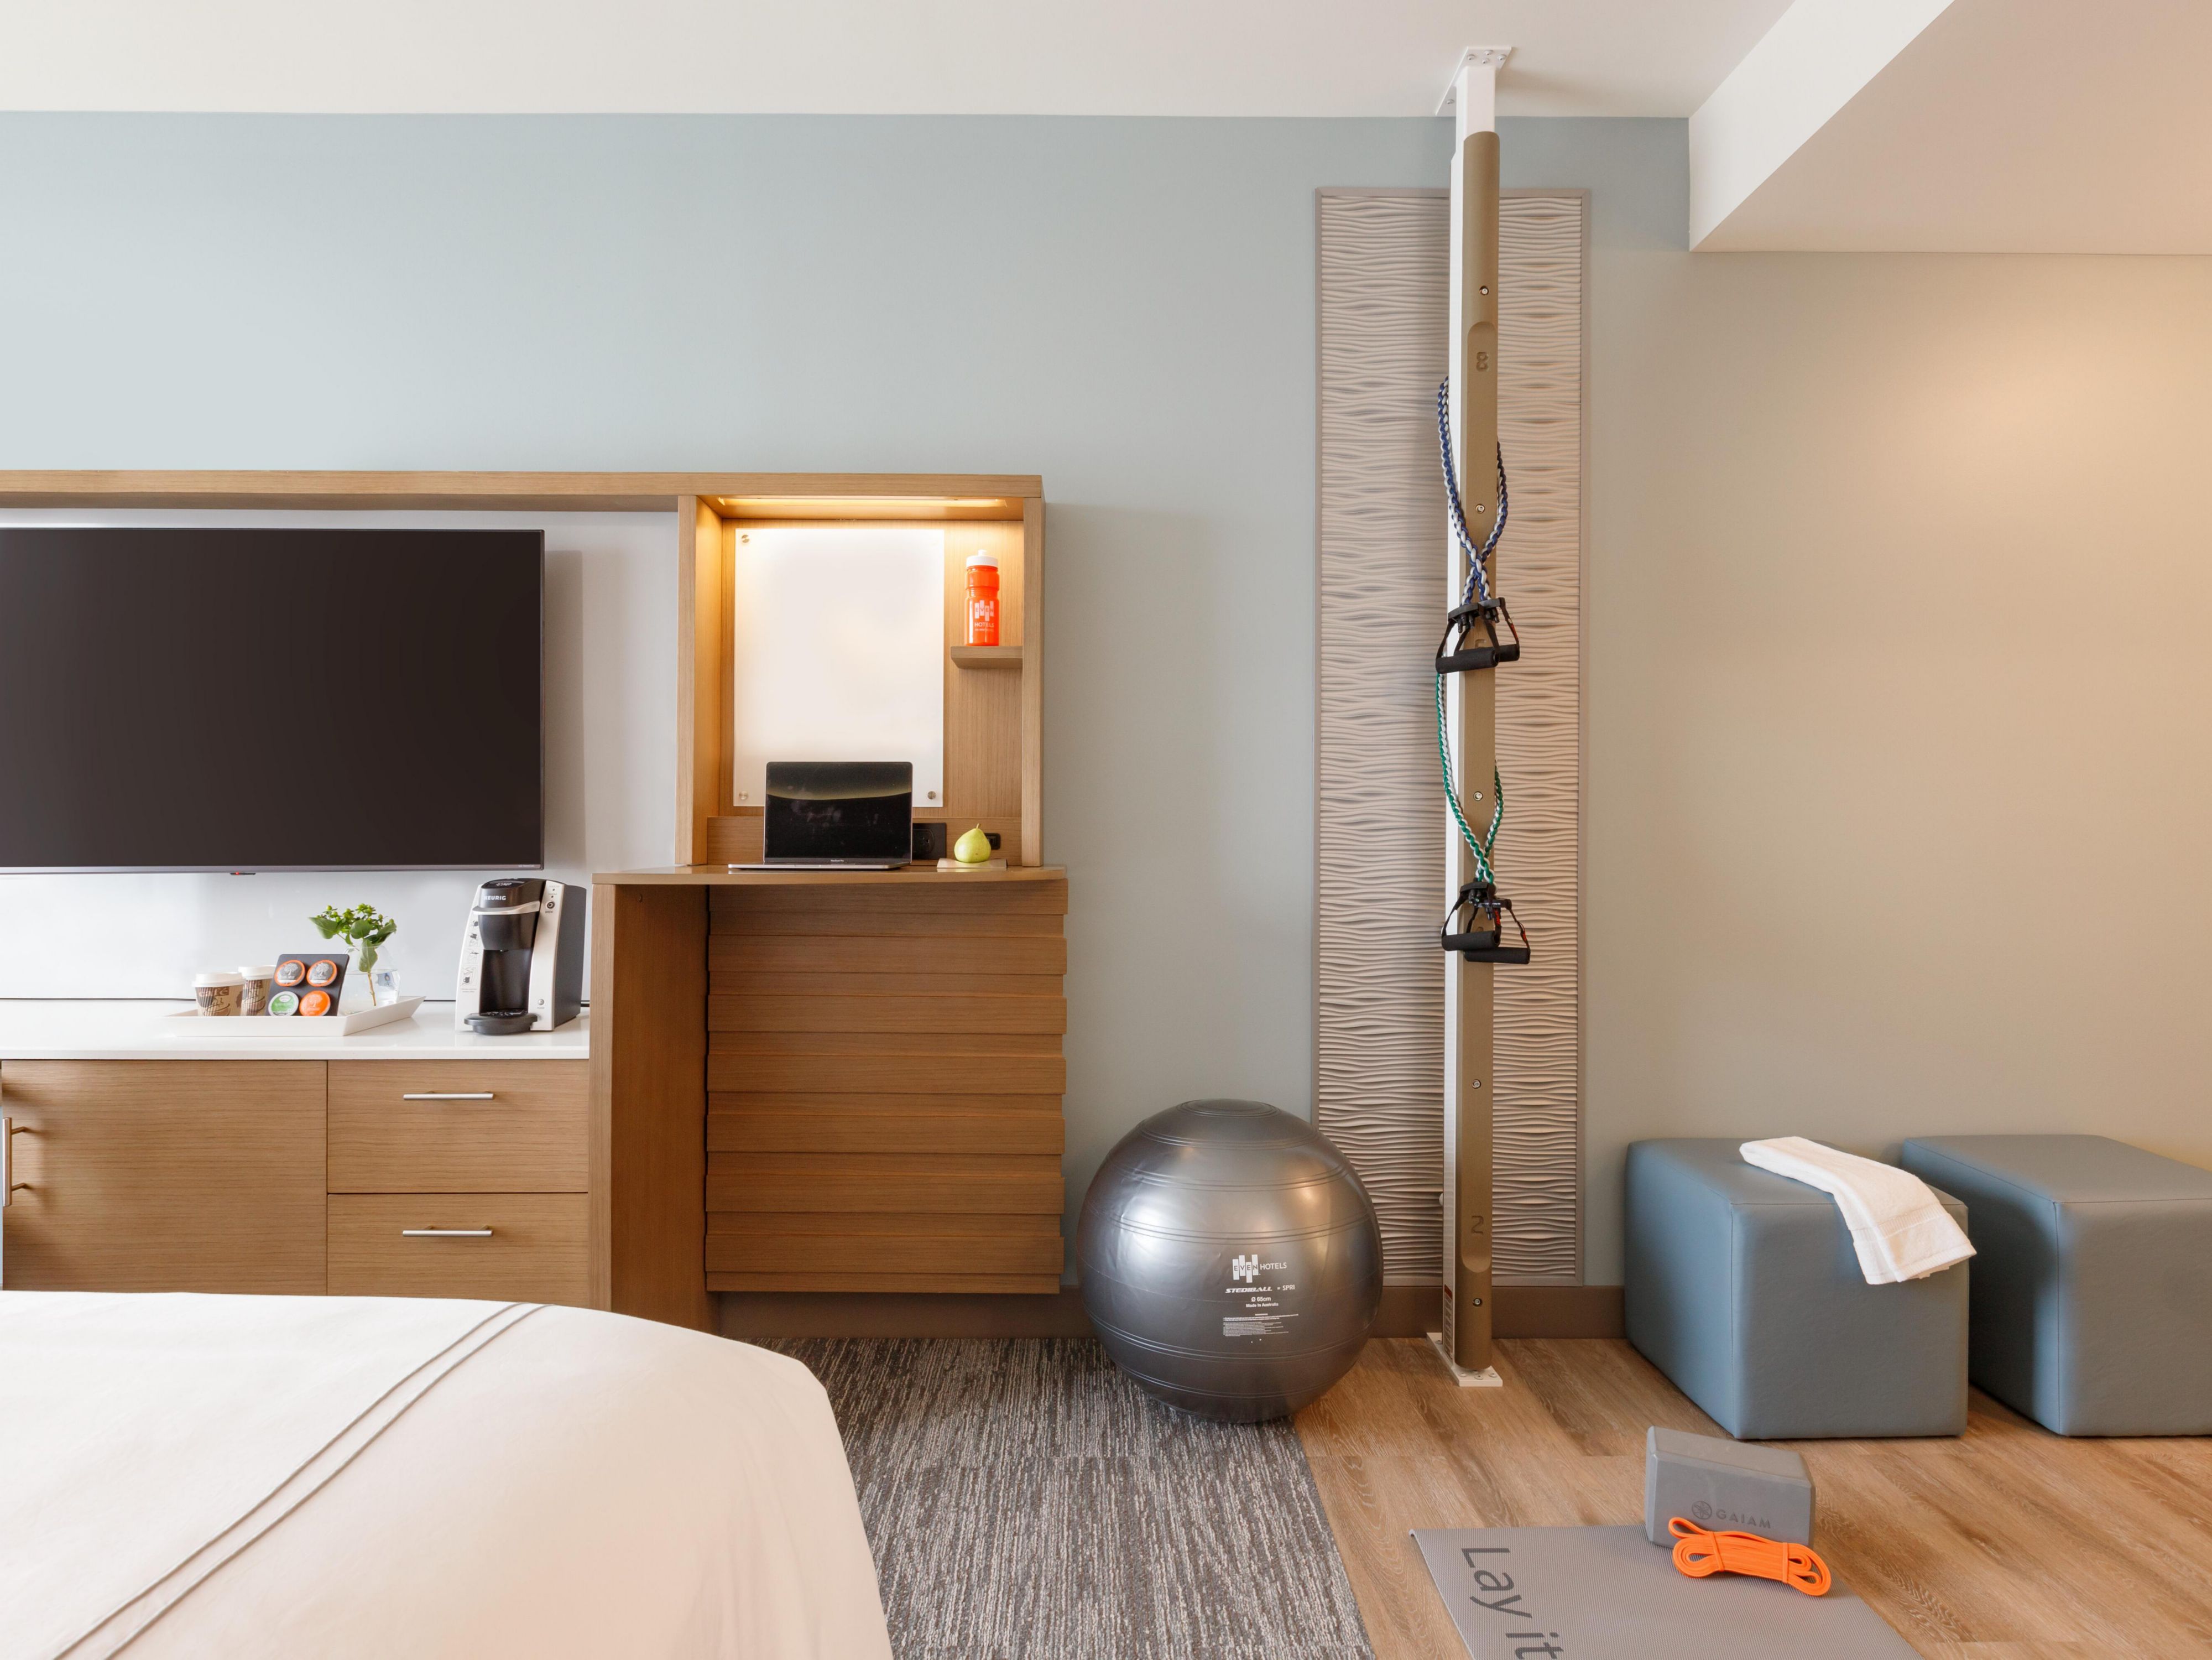 With in-room fitness equipment, our pet-friendly hotel makes it easy for you to maintain a healthy lifestyle while traveling. Stay productive with flexible workspaces and complimentary high-speed Wi-Fi. Relax in the spa-inspired shower before climbing into comfortable beds outfitted with natural linens for a restful night's sleep.​